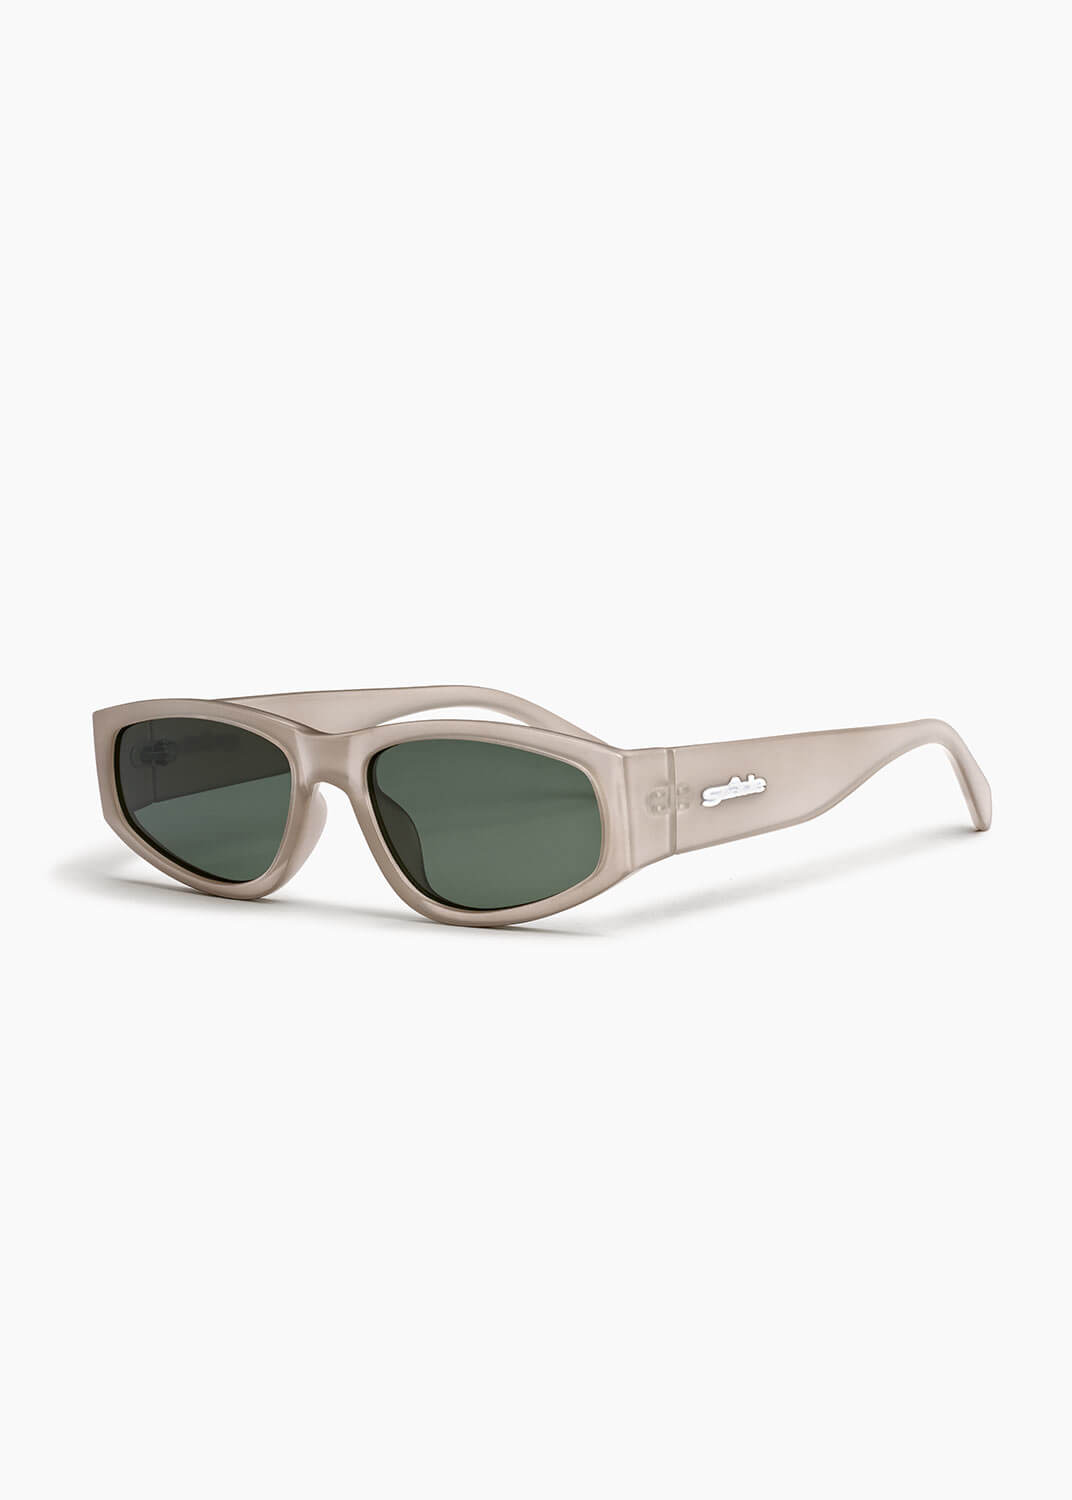 Szade RECYCLED SUNGLASSES  Szade - Melba in Iced Tungsten/Moss Polarised